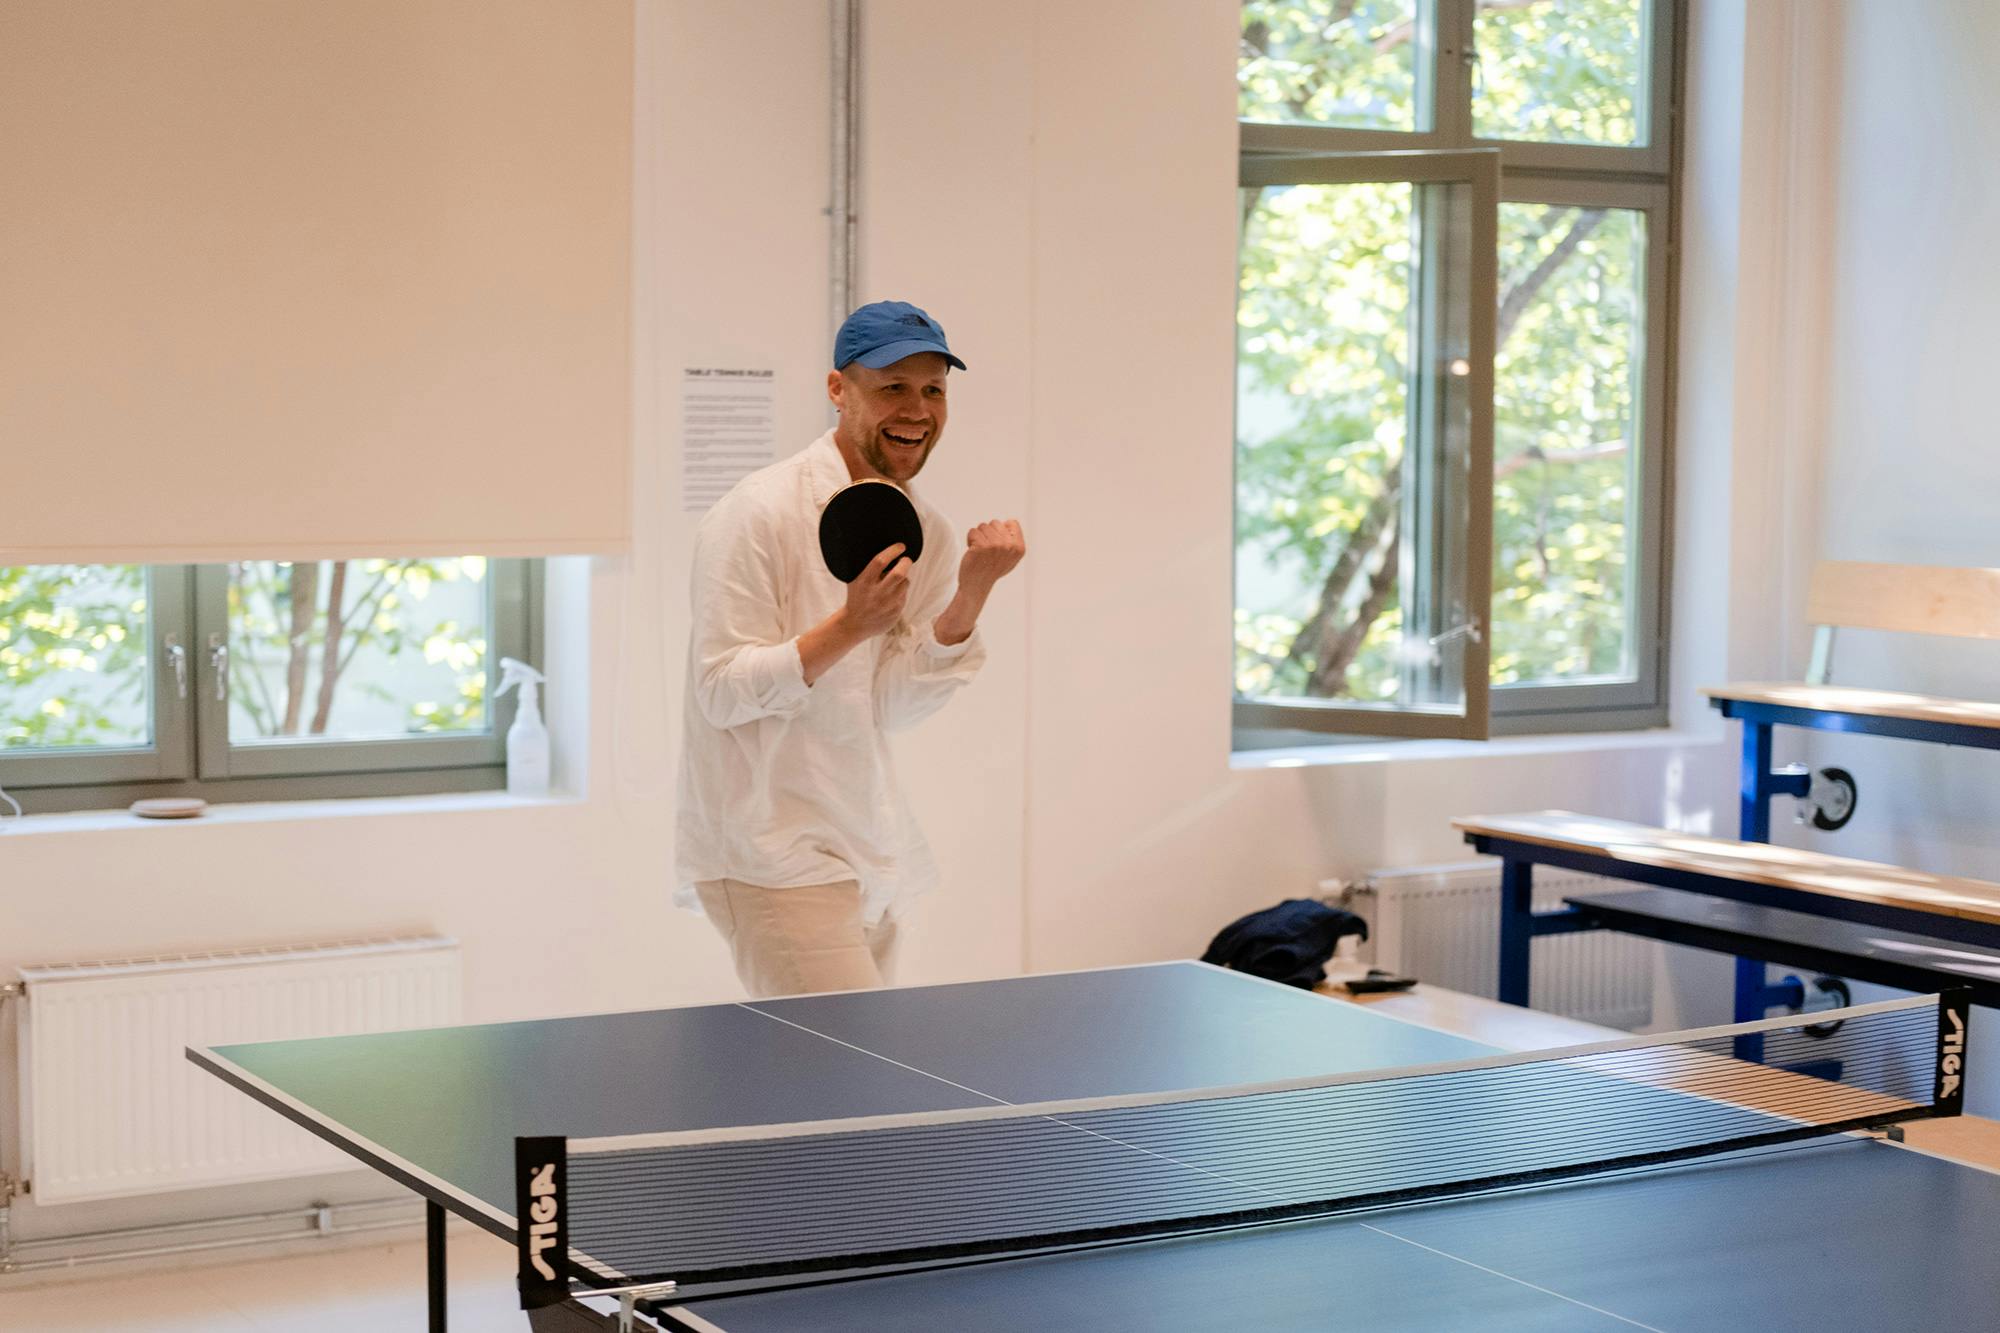 Table tennis at the office